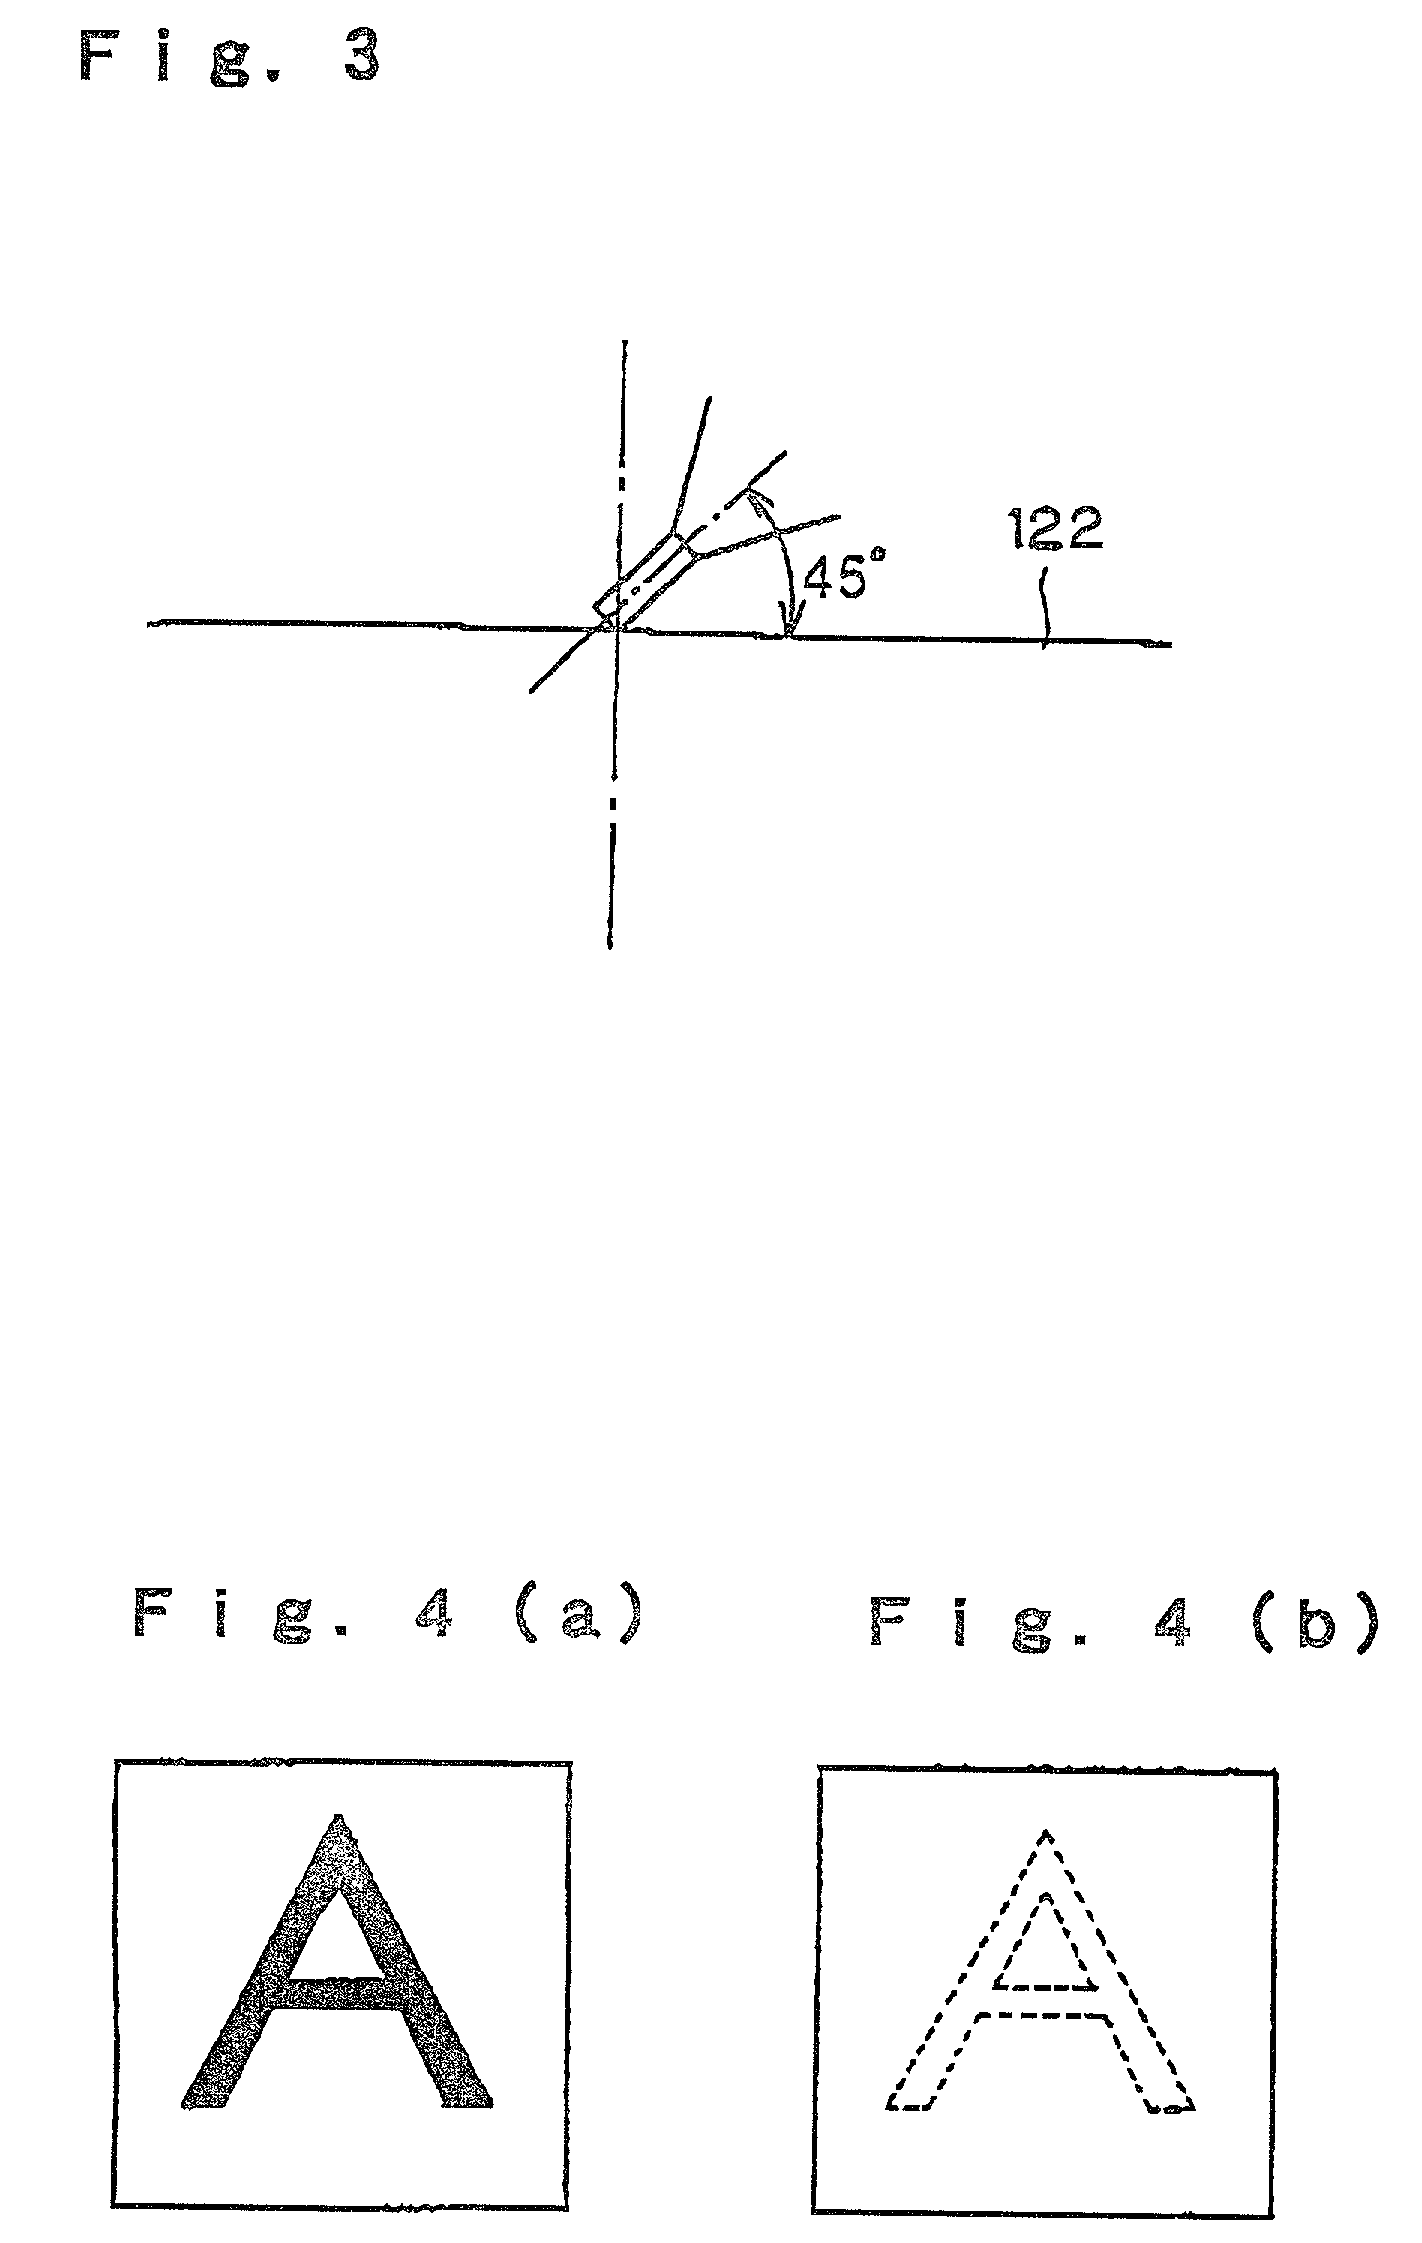 Liquid crystal optical element comprising a resin layer having a surface hardness of b or less